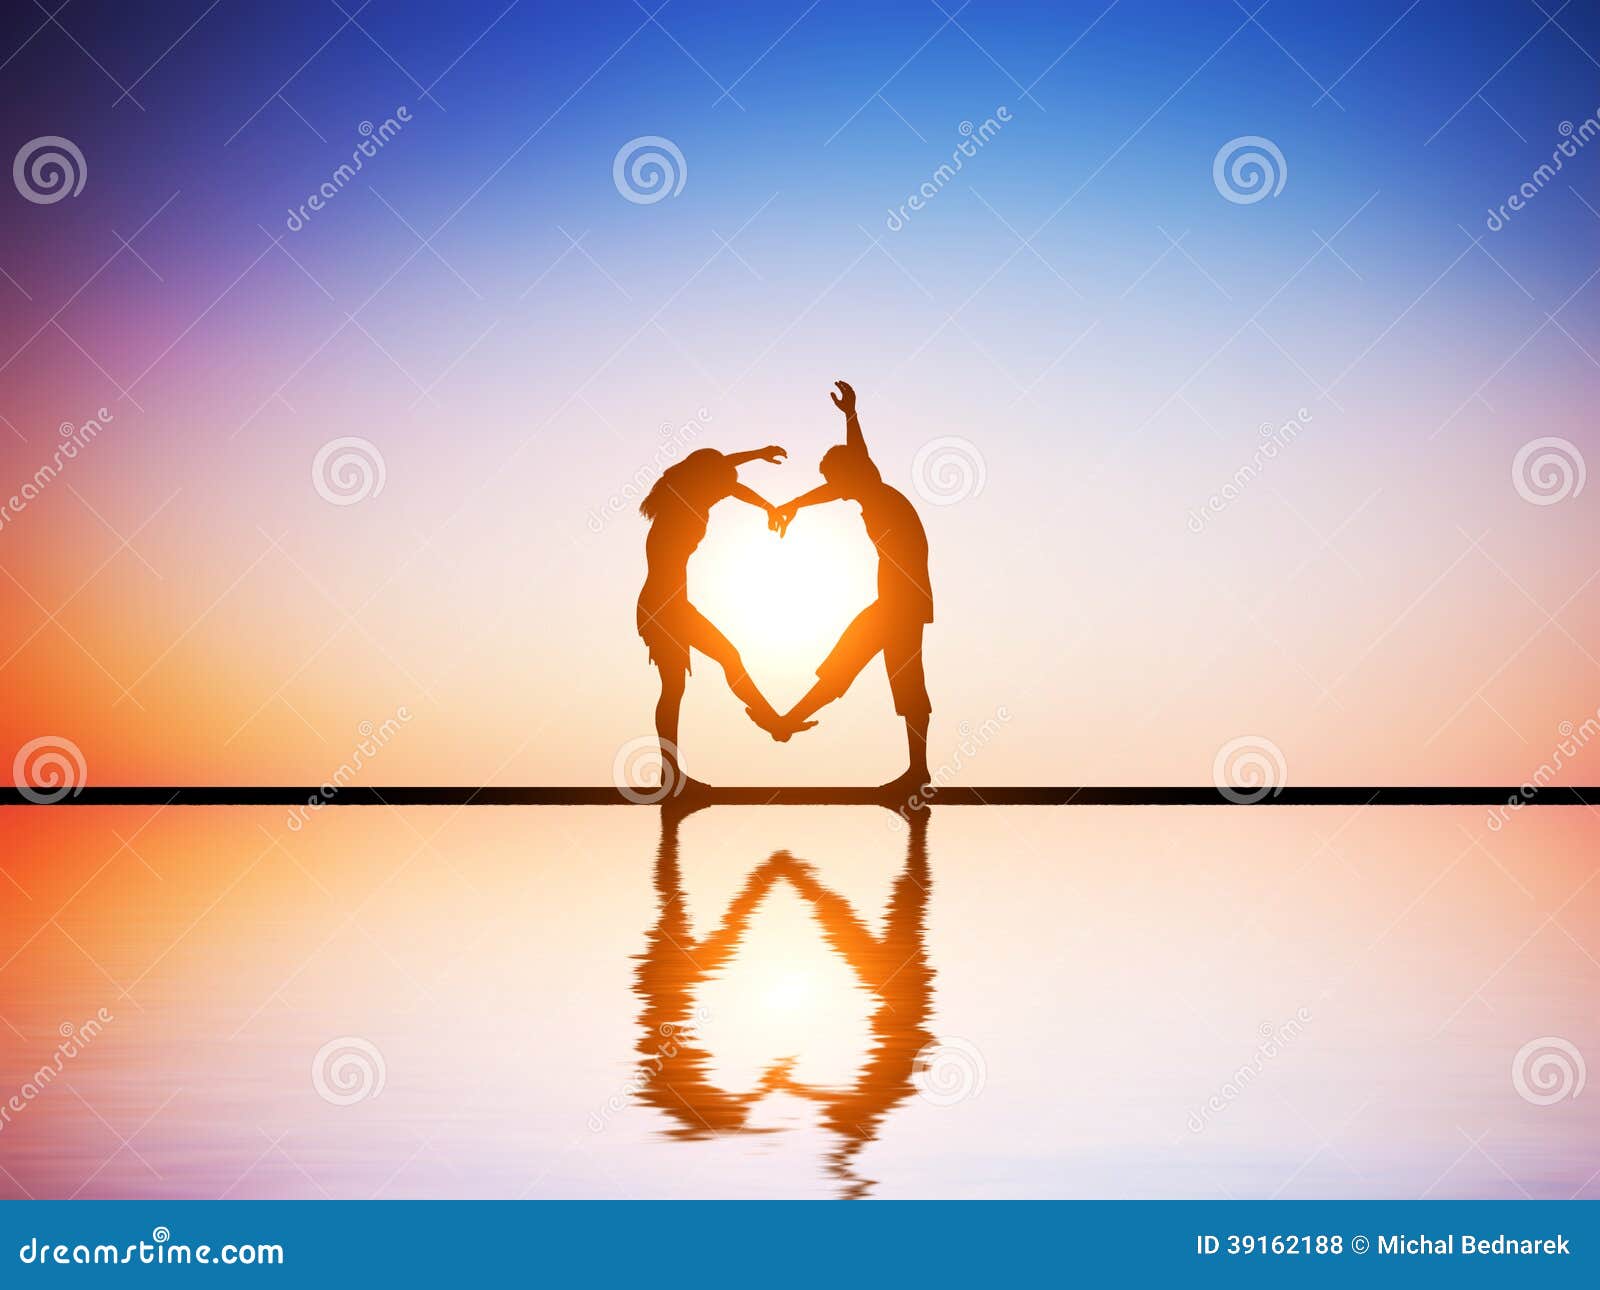 a happy couple in love making a heart 